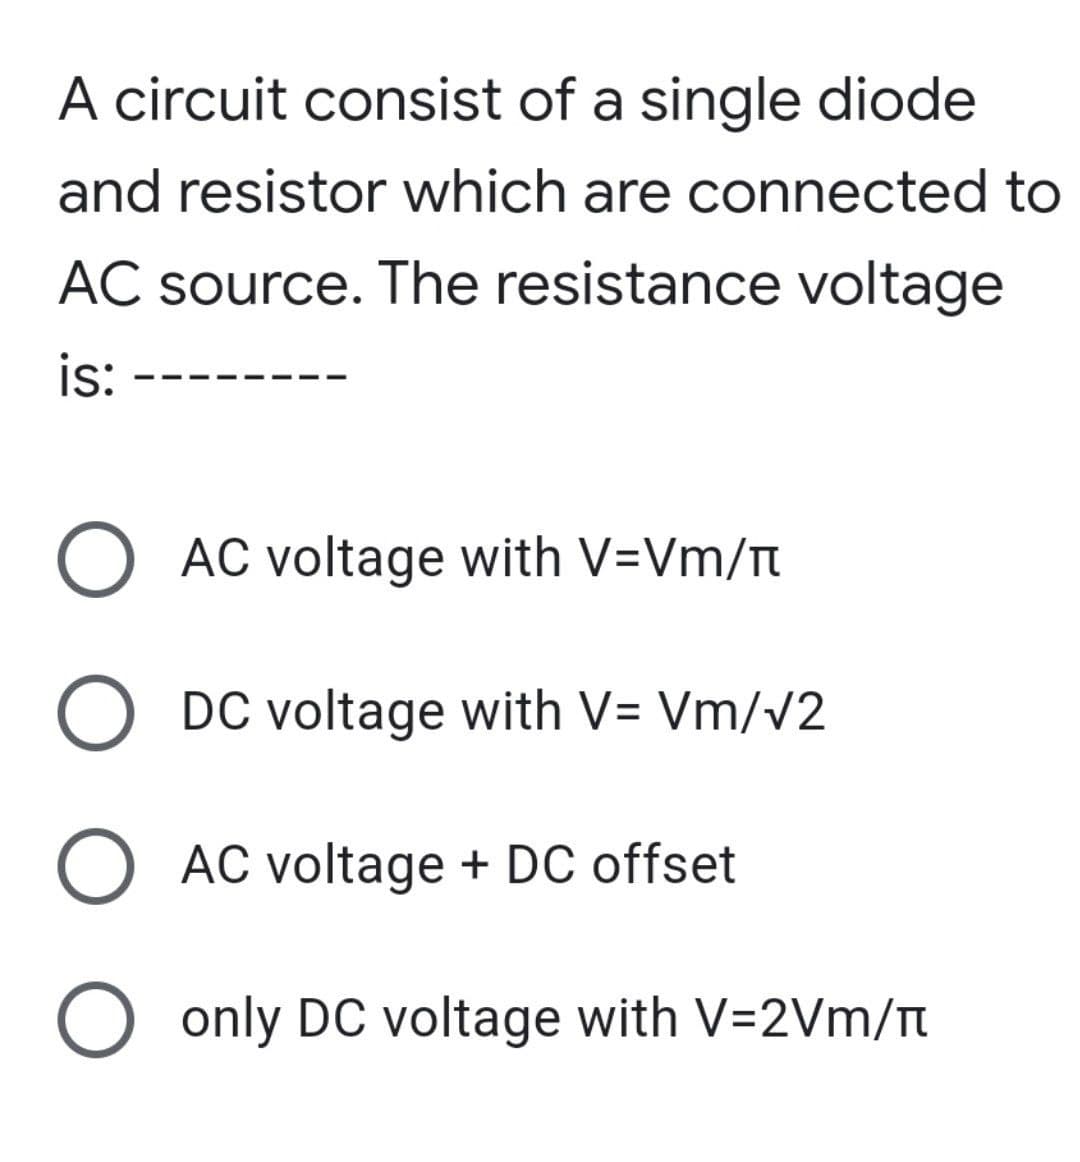 A circuit consist of a single diode
and resistor which are connected to
AC source. The resistance voltage
is:
O AC voltage with V=Vm/
O DC voltage with V= Vm/v2
O AC voltage + DC offset
O only DC voltage with V=2Vm/